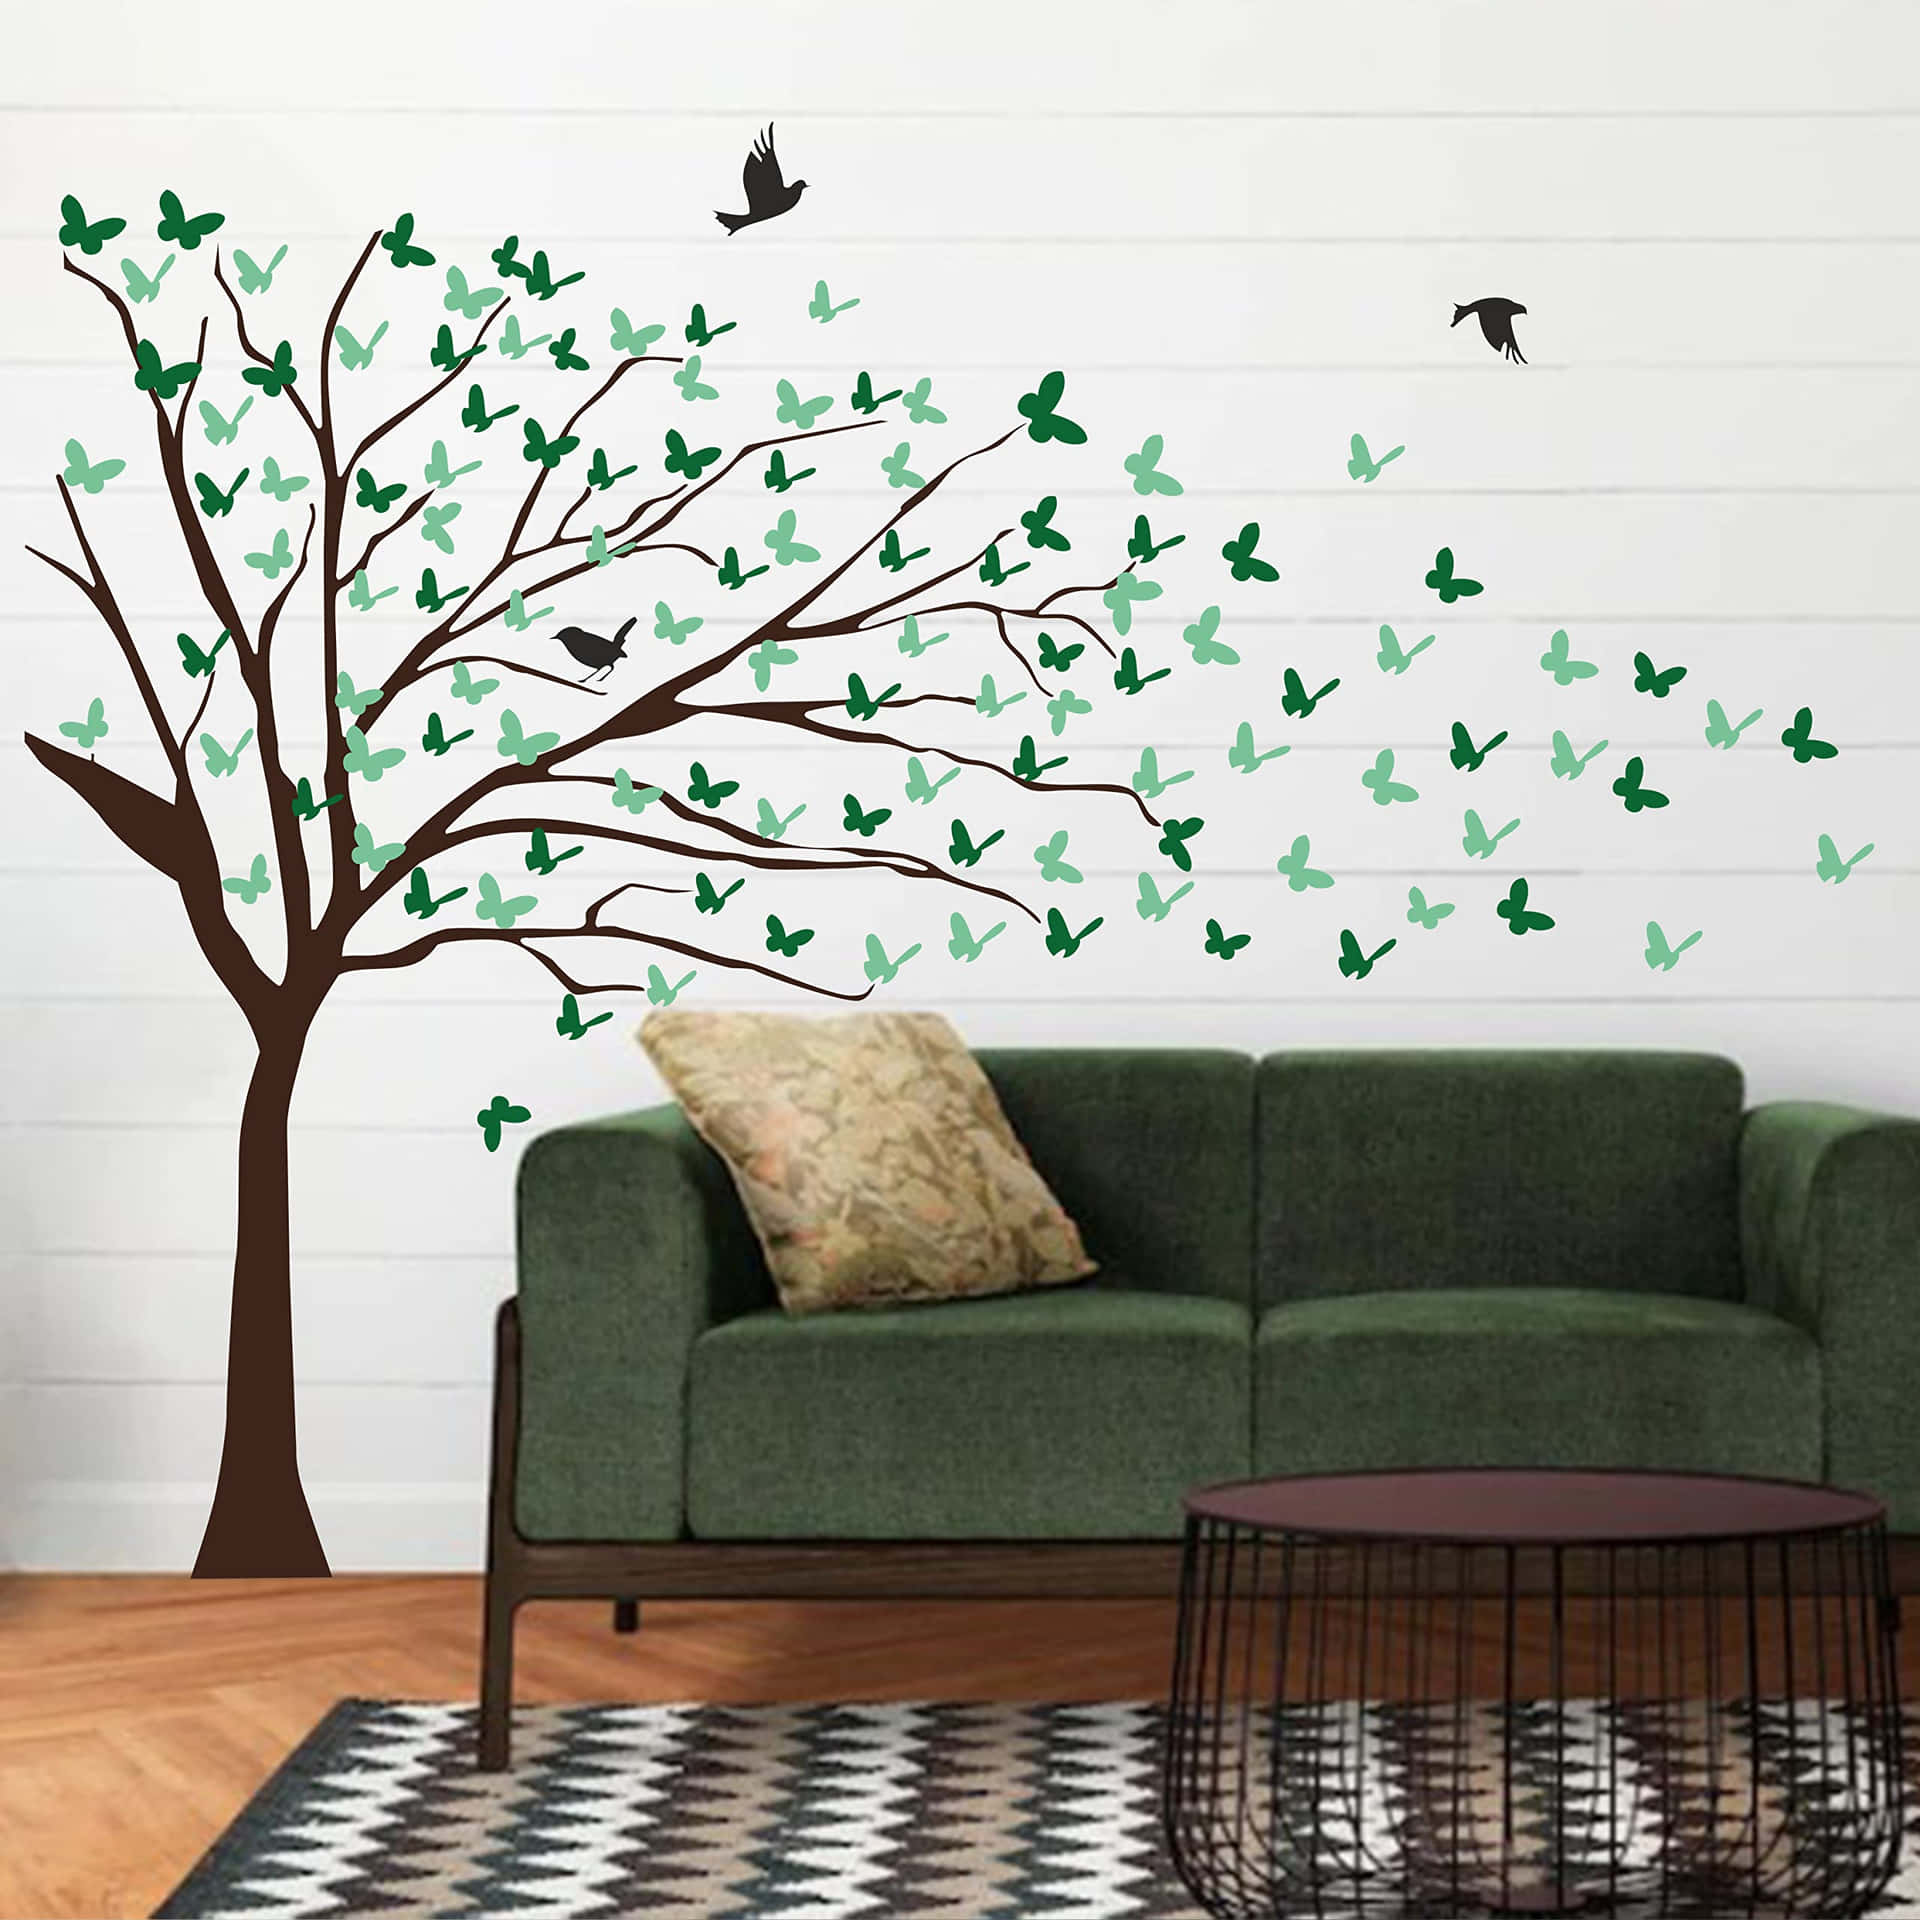 A Living Room With A Tree And Birds Flying Around It